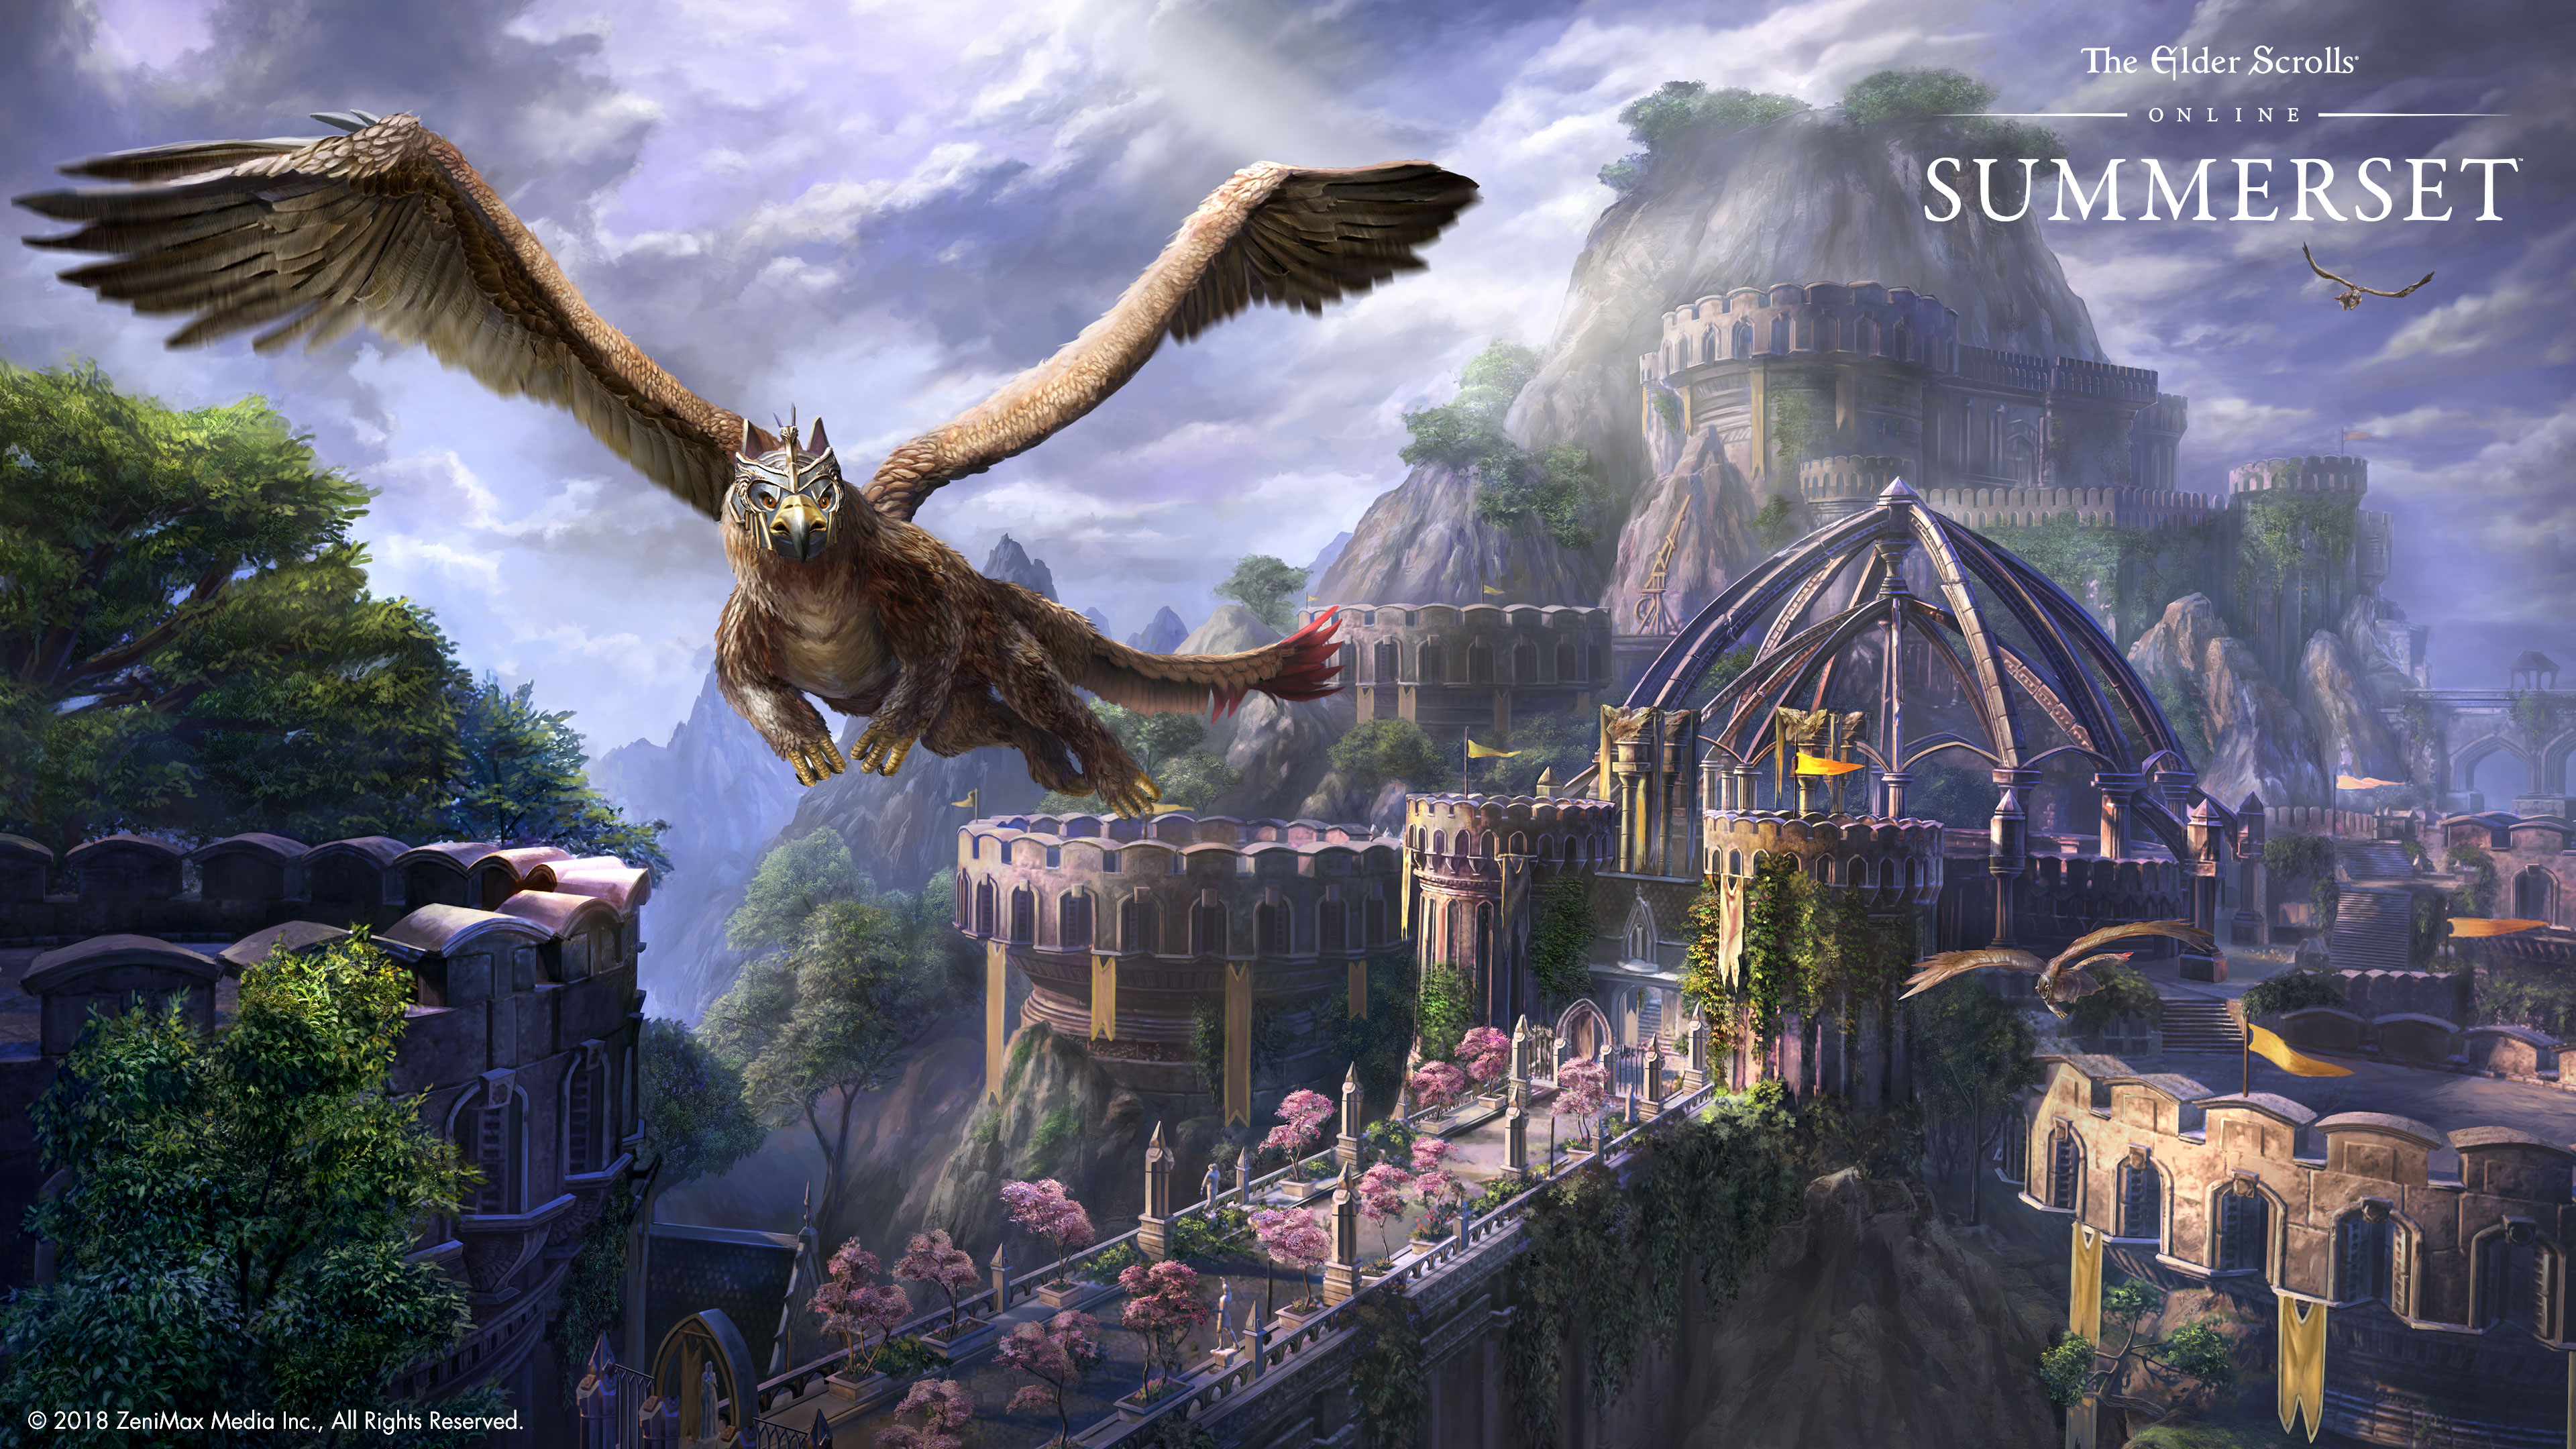 teso wallpaper,action adventure game,strategy video game,cg artwork,adventure game,pc game